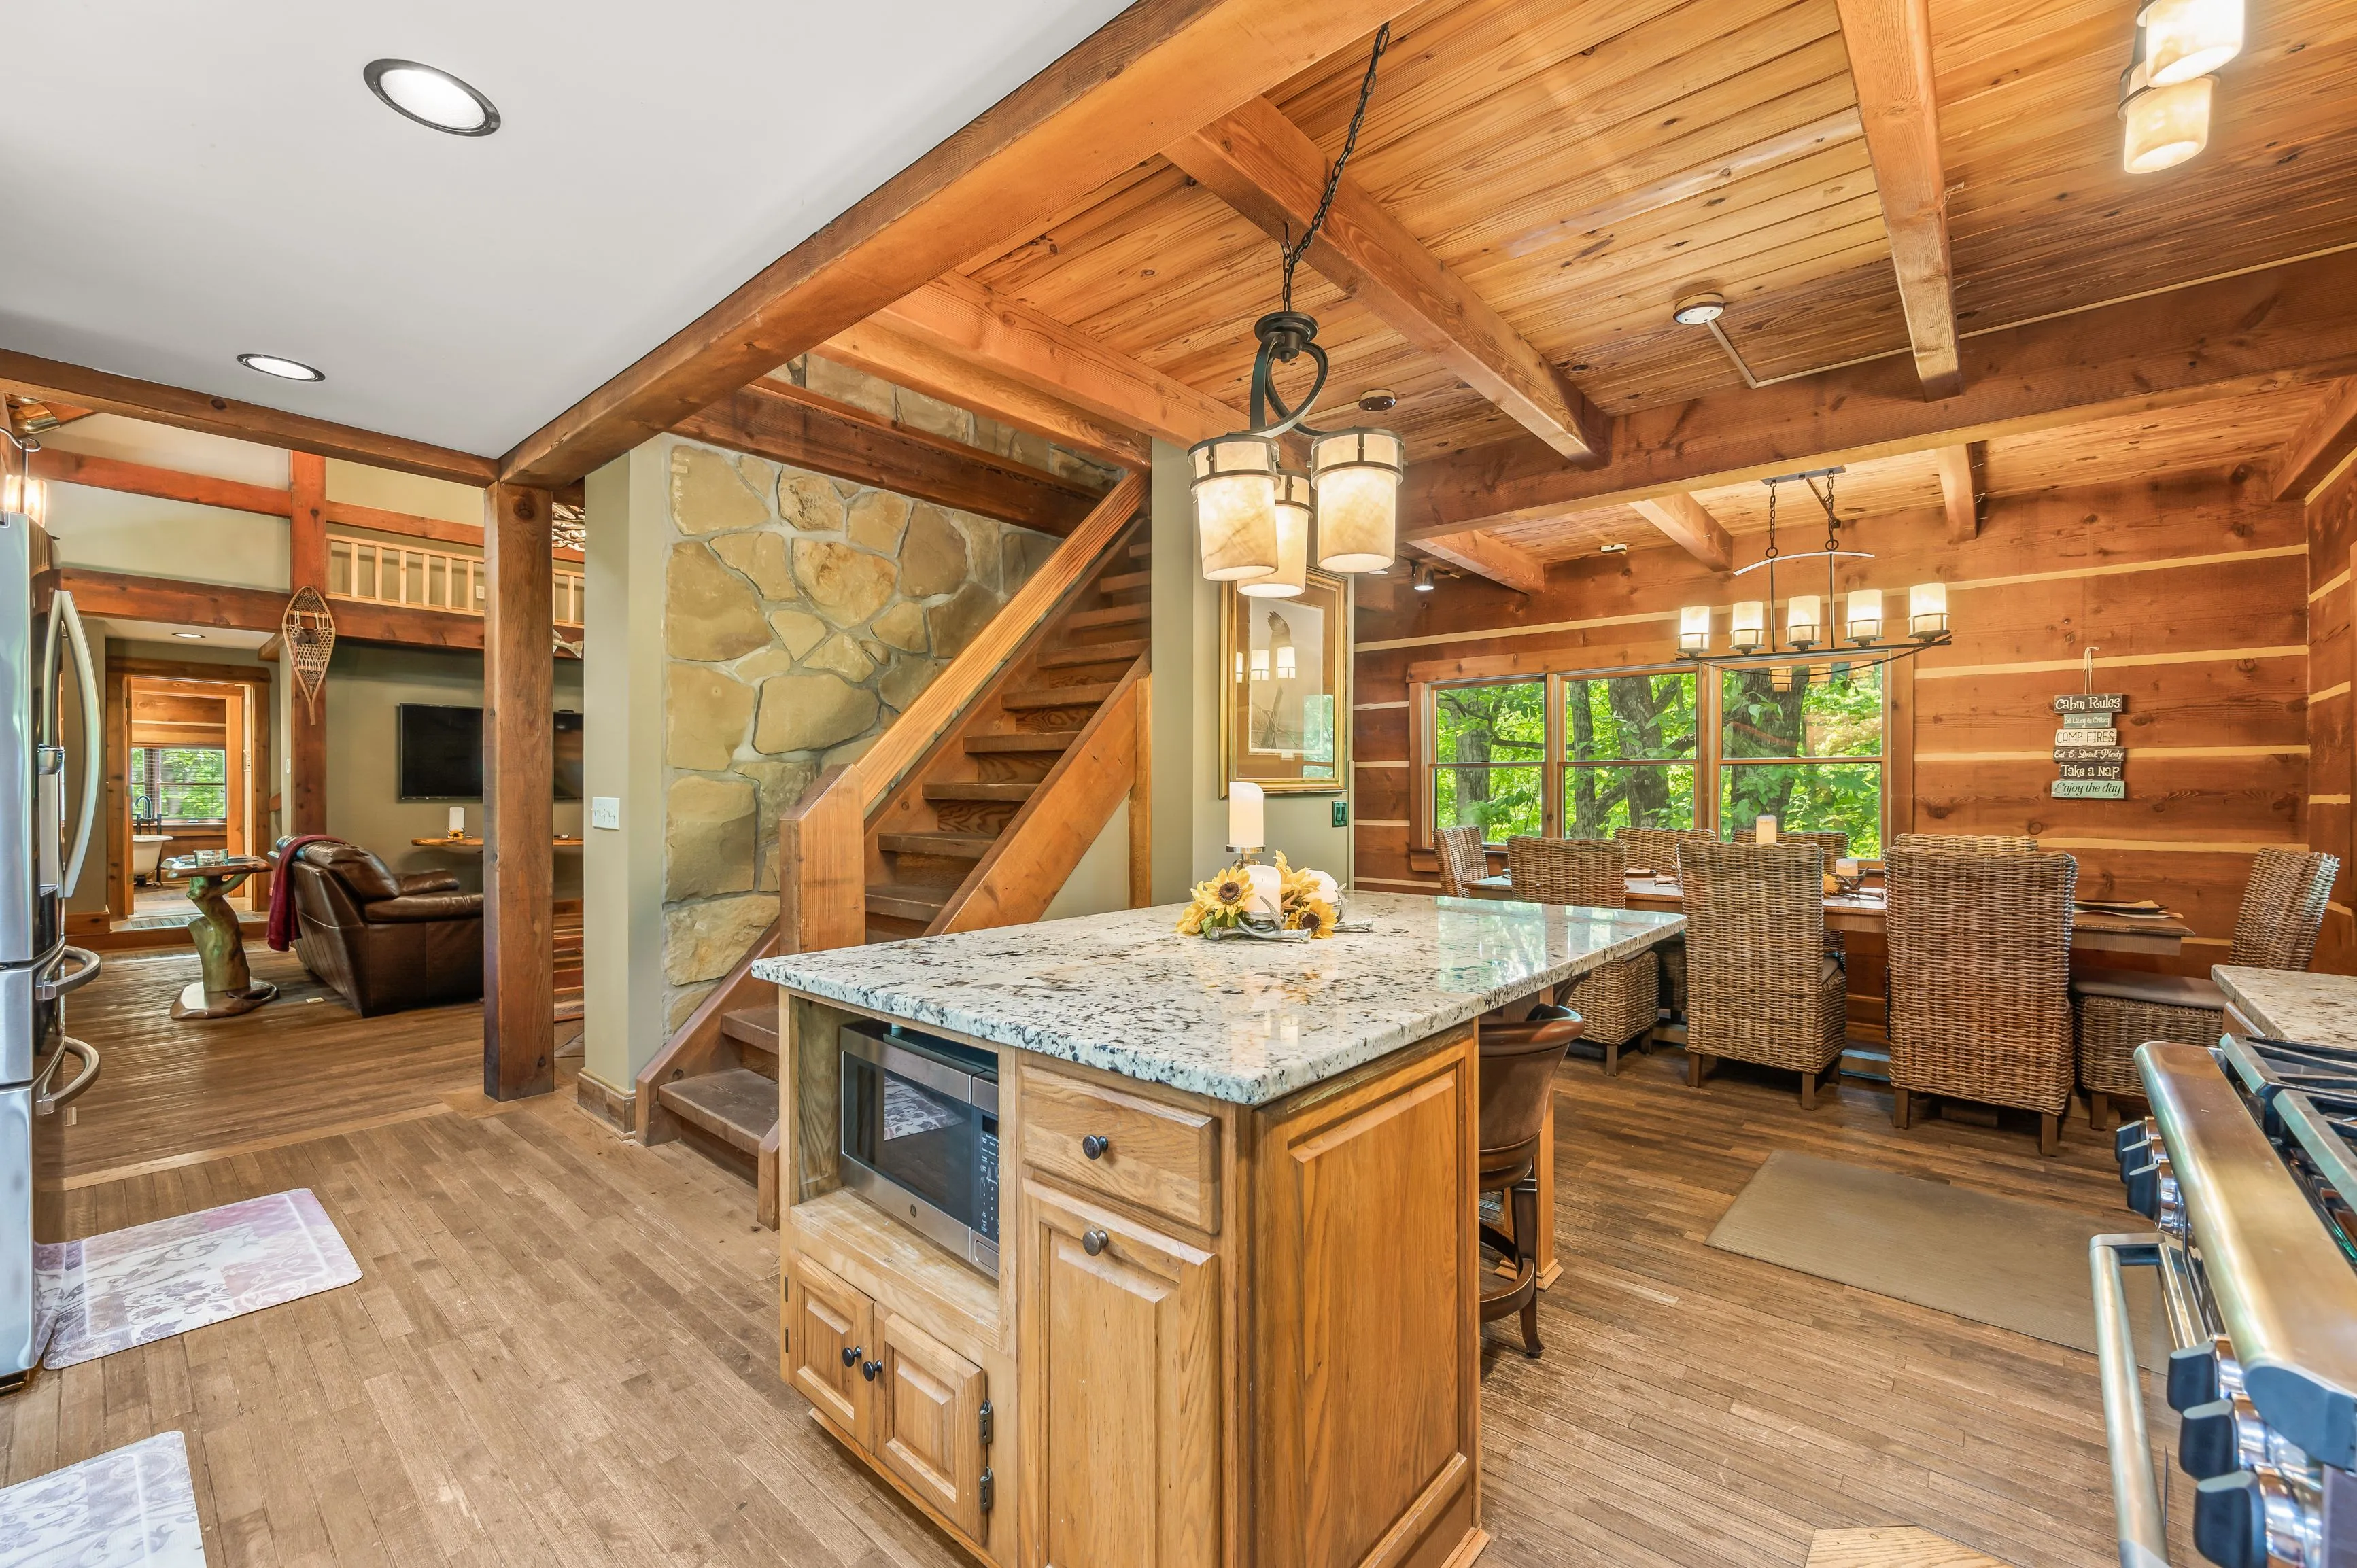 Spacious rustic kitchen with wooden cabinetry, granite countertops, and stainless steel appliances, featuring exposed wooden beams, a stone staircase, and a dining area with large windows overlooking greenery.